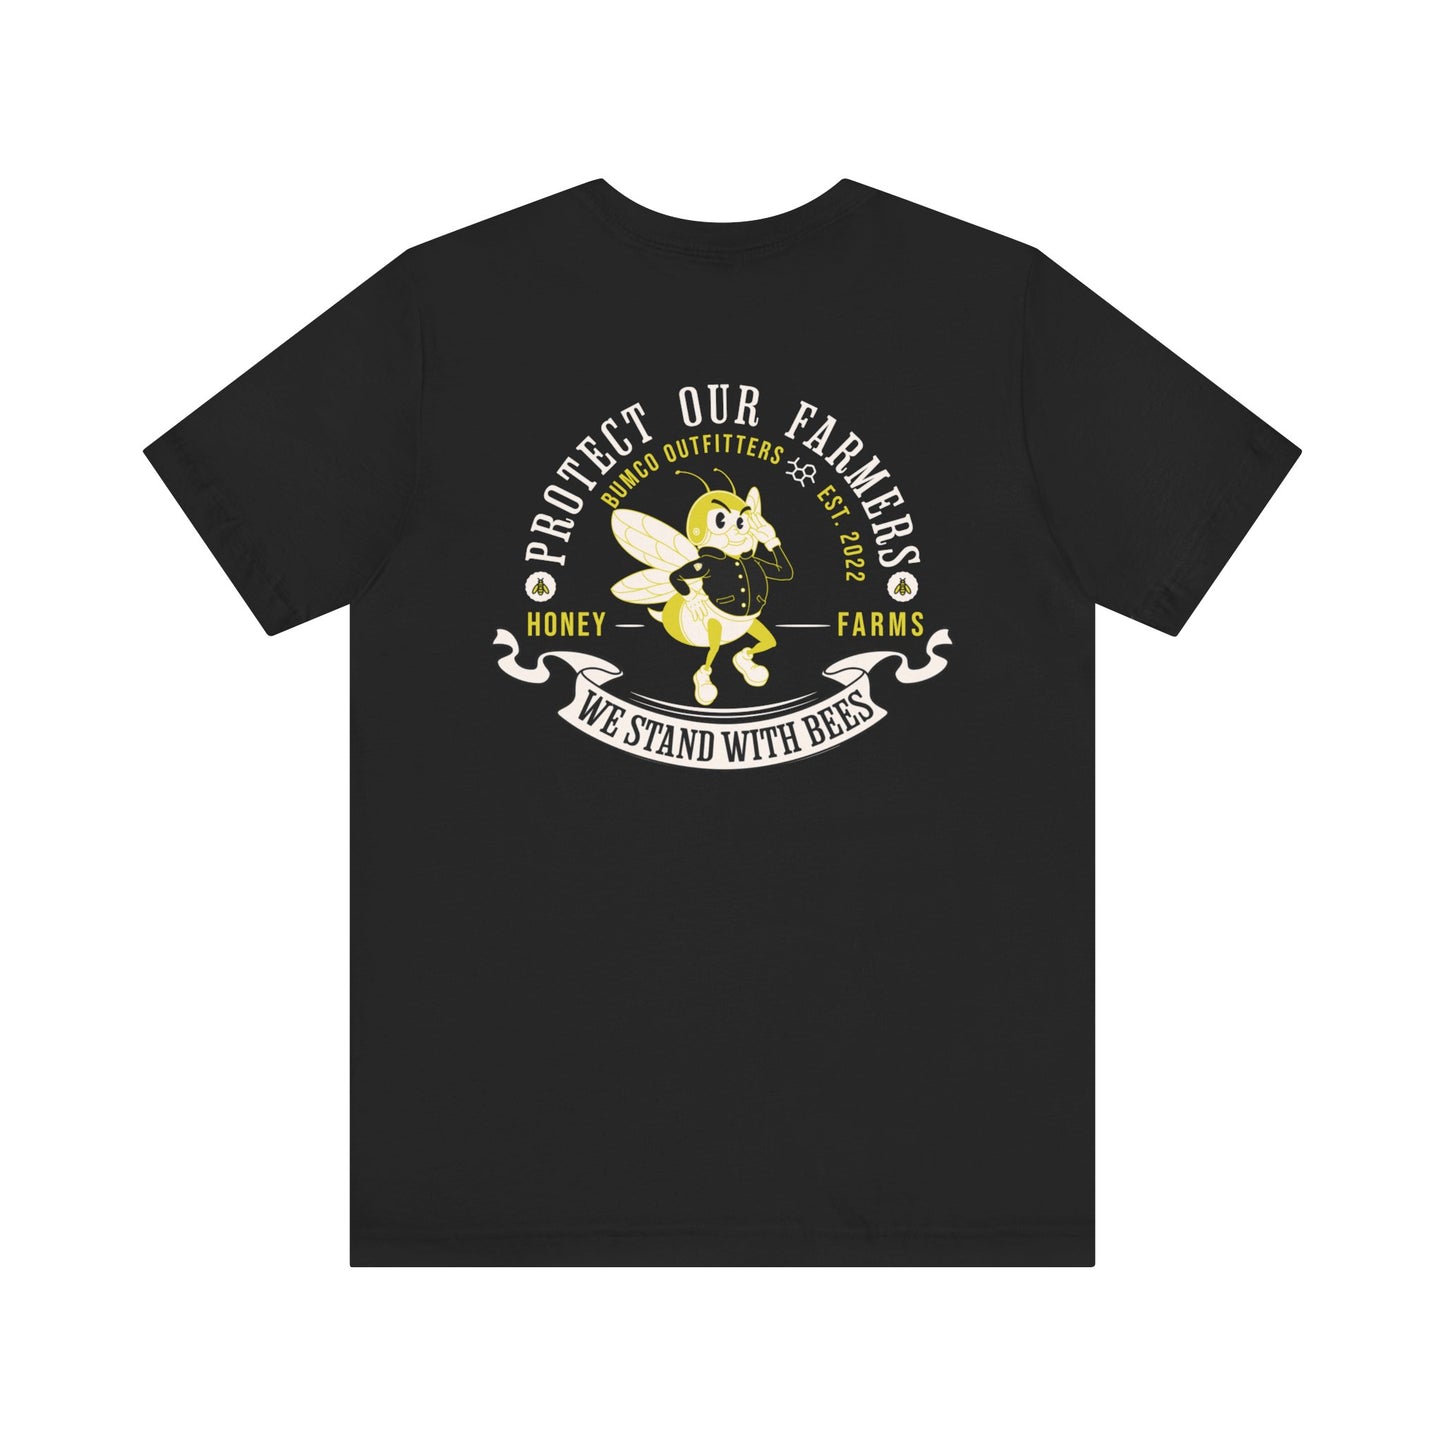 Protect the Bees - T-Shirt